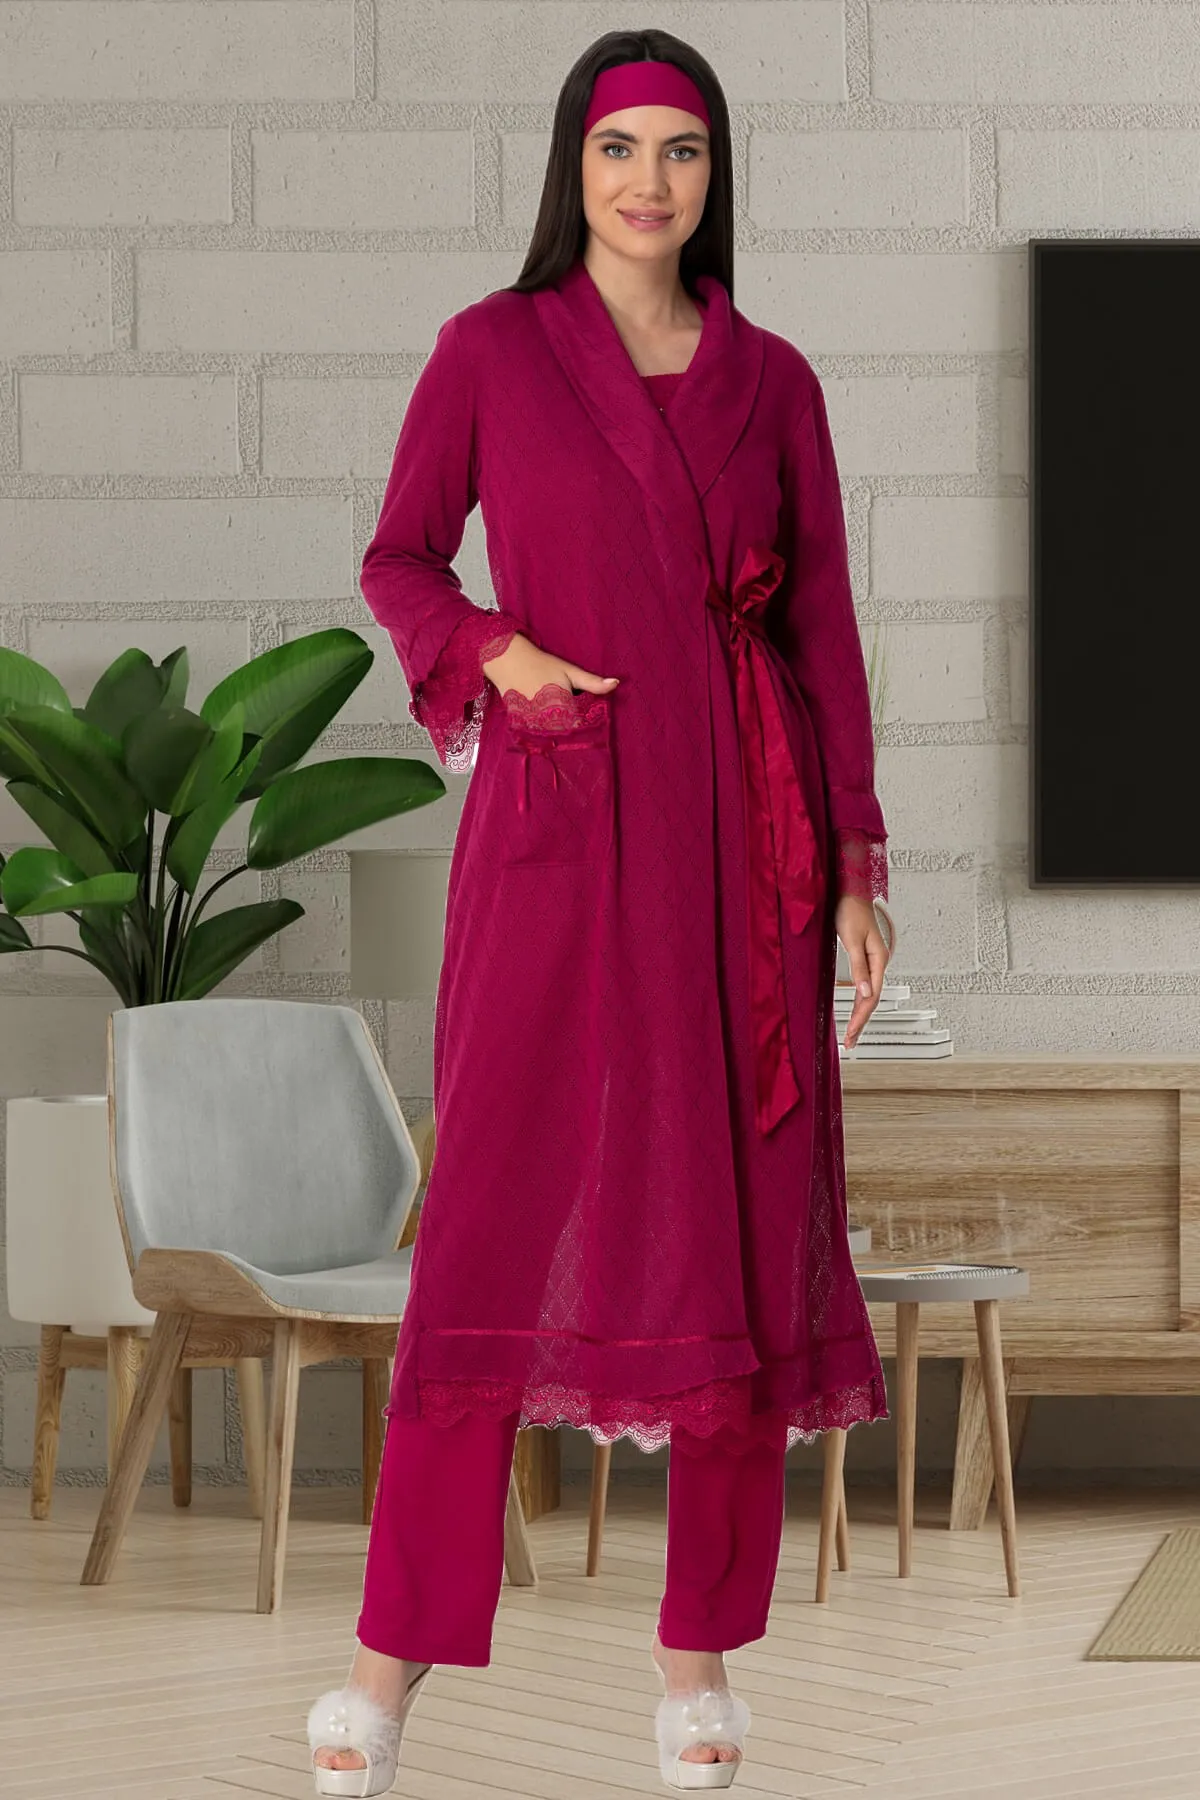 Postpartum Pajamas Set with Dressing Gown Cotton Women Postpartum Pajamas Set Maternity Clothing Women Outfits 3 Pieces enlarge